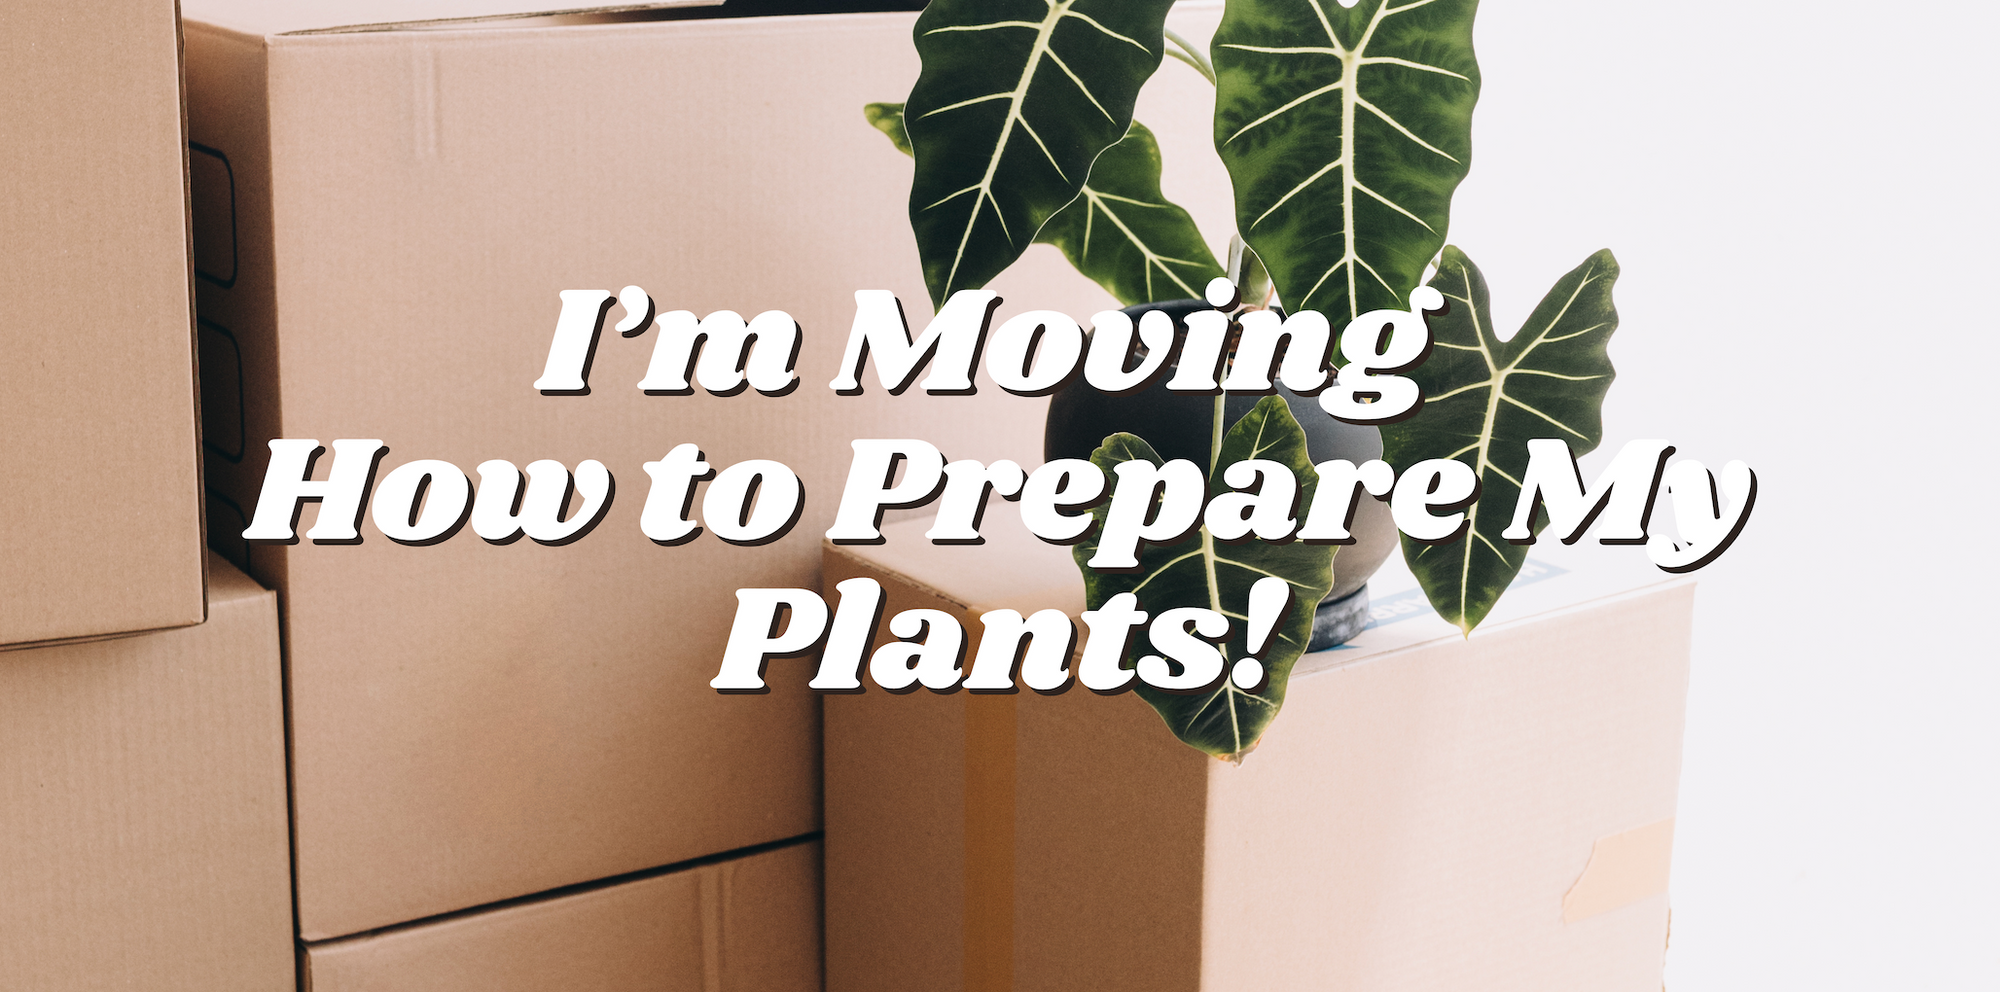 I’m Moving - How to Prepare My Plants!